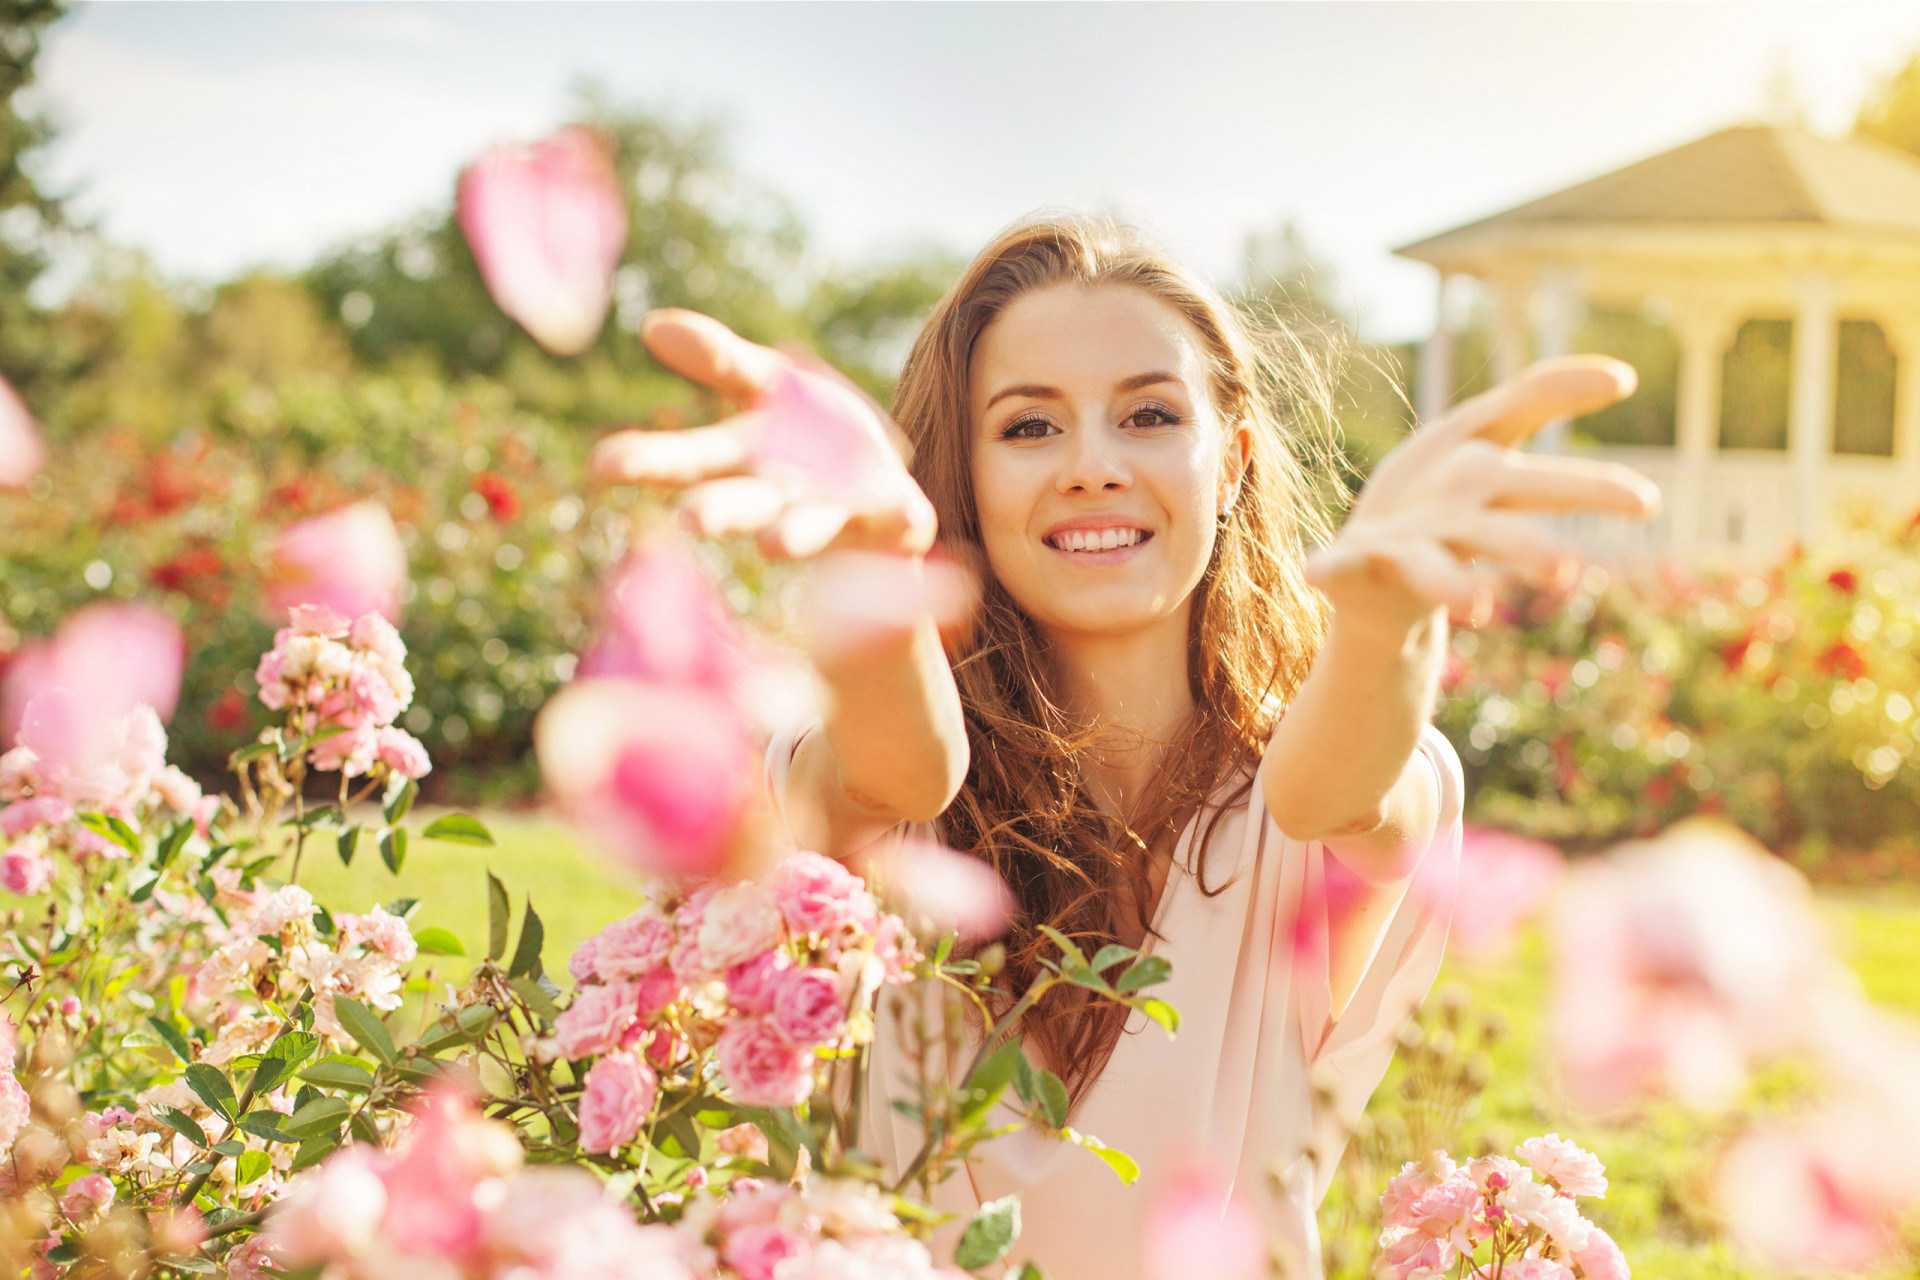 Do you know the spring flower of your zodiac sign?